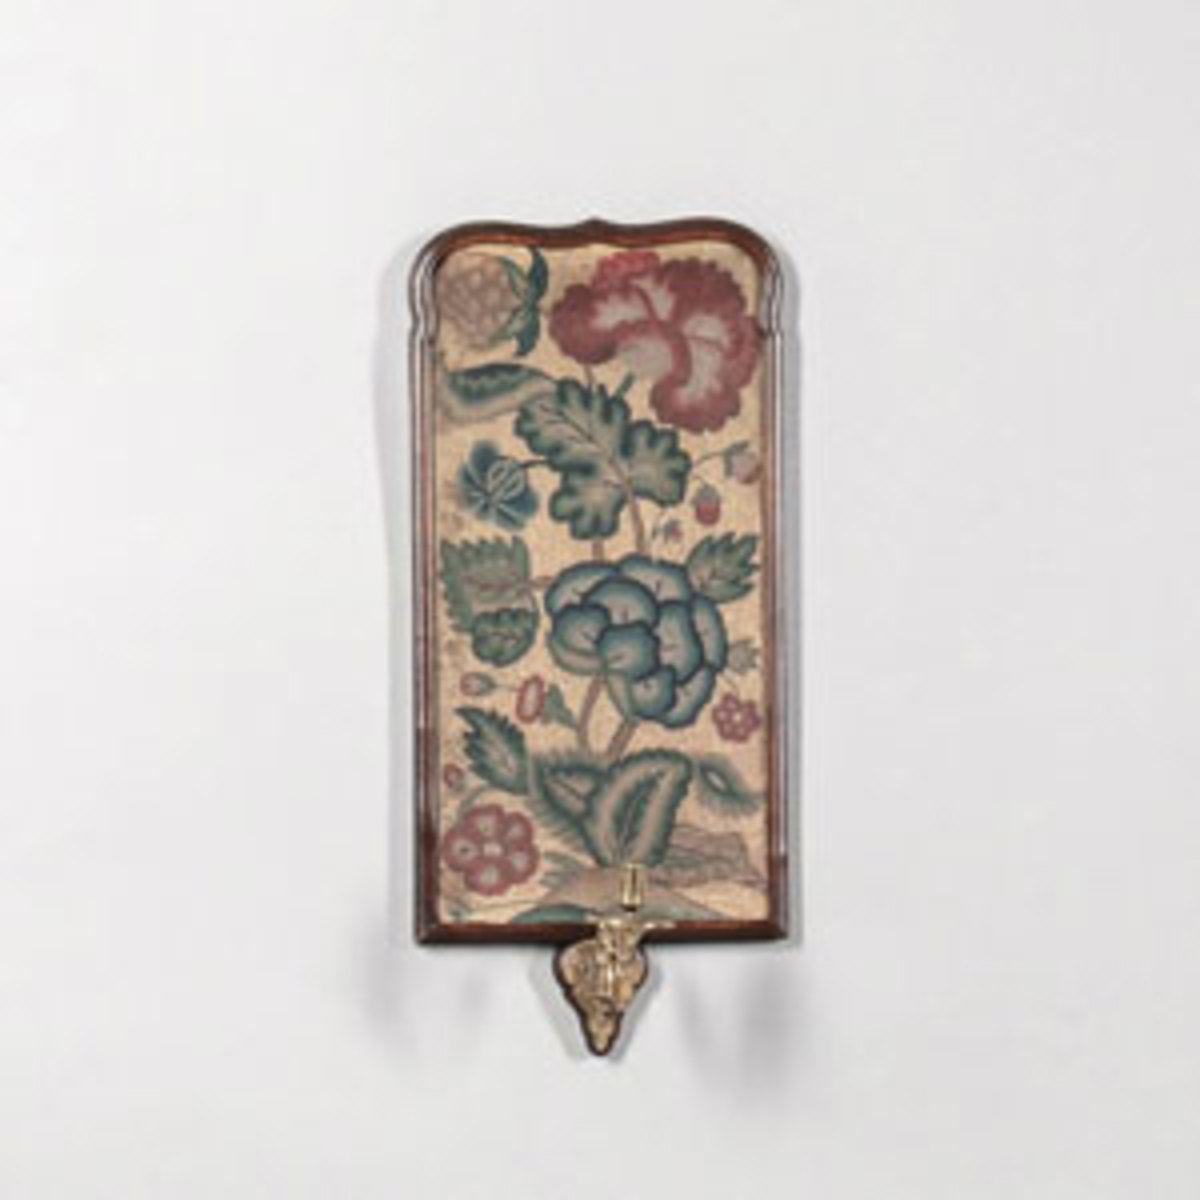  Needlework candle sconce, England, 18th century, the rectangular "sconce" with a framed floral needlework picture supporting a single brass candle socket on a scrollwork branch, 22" h, 9-3/4" w. Sold for $6,765 - far above its estimate of $800-$1,200. Image courtesy of Skinner Auctioneers and Appraisers